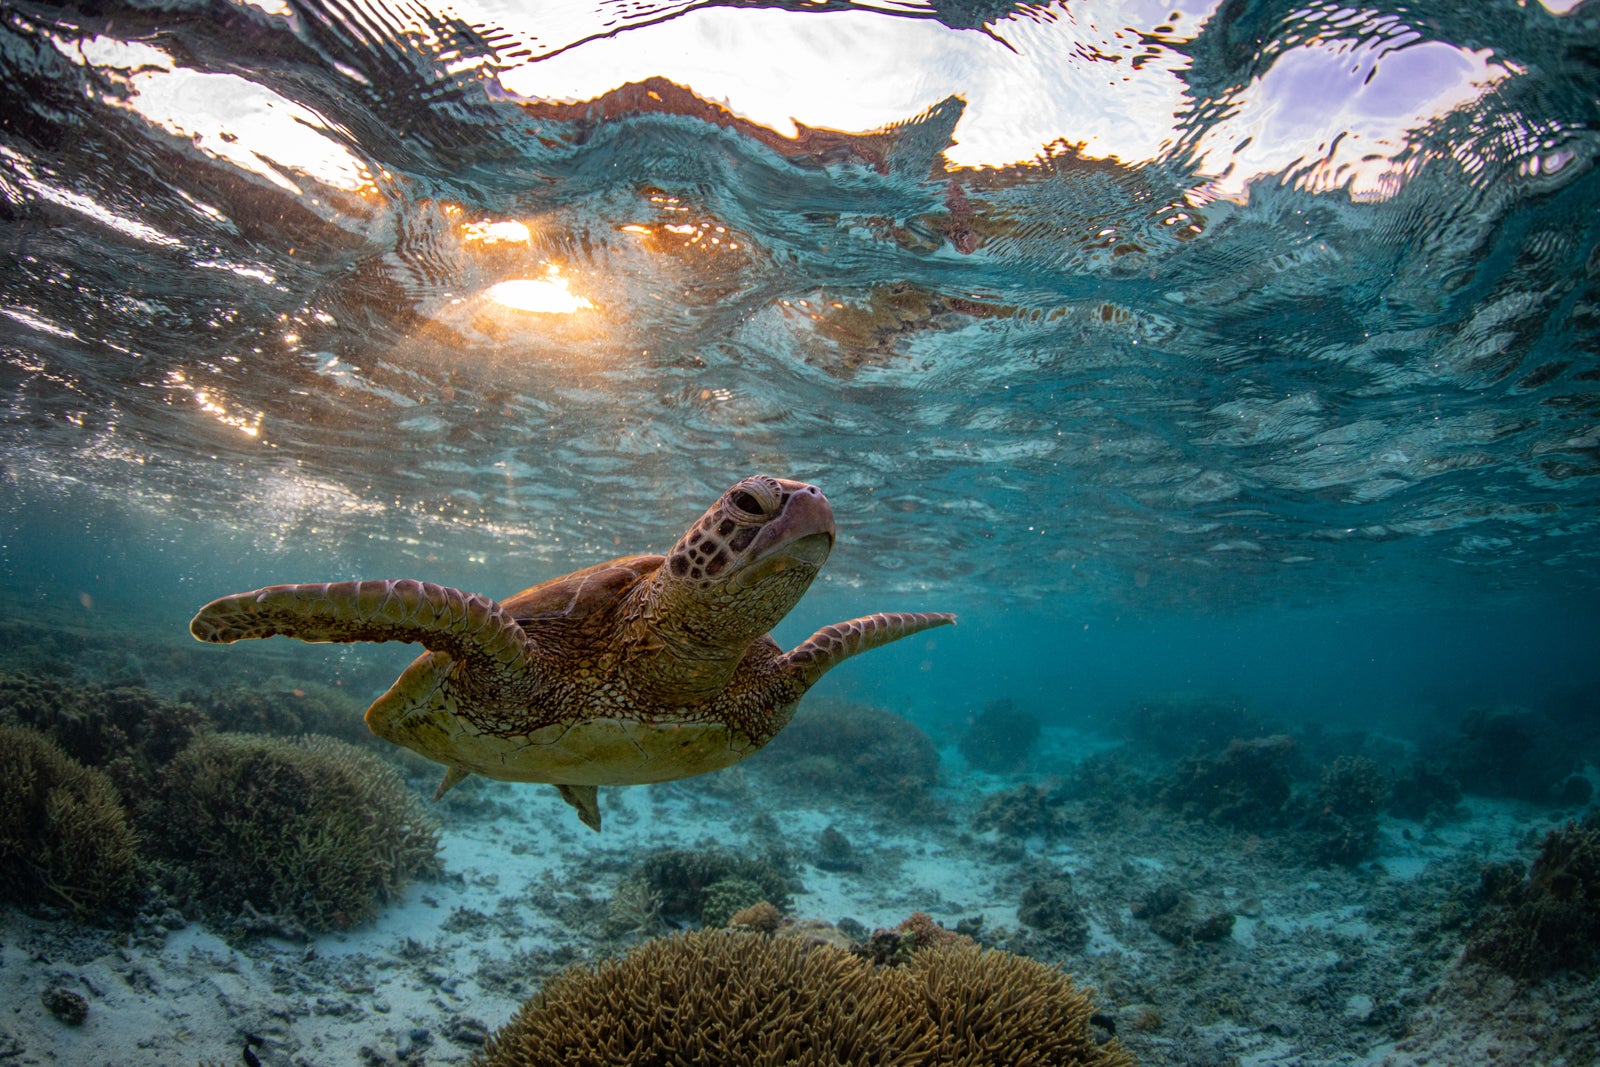 Great Barrier Reef Underwater Landscapes and Wildlife